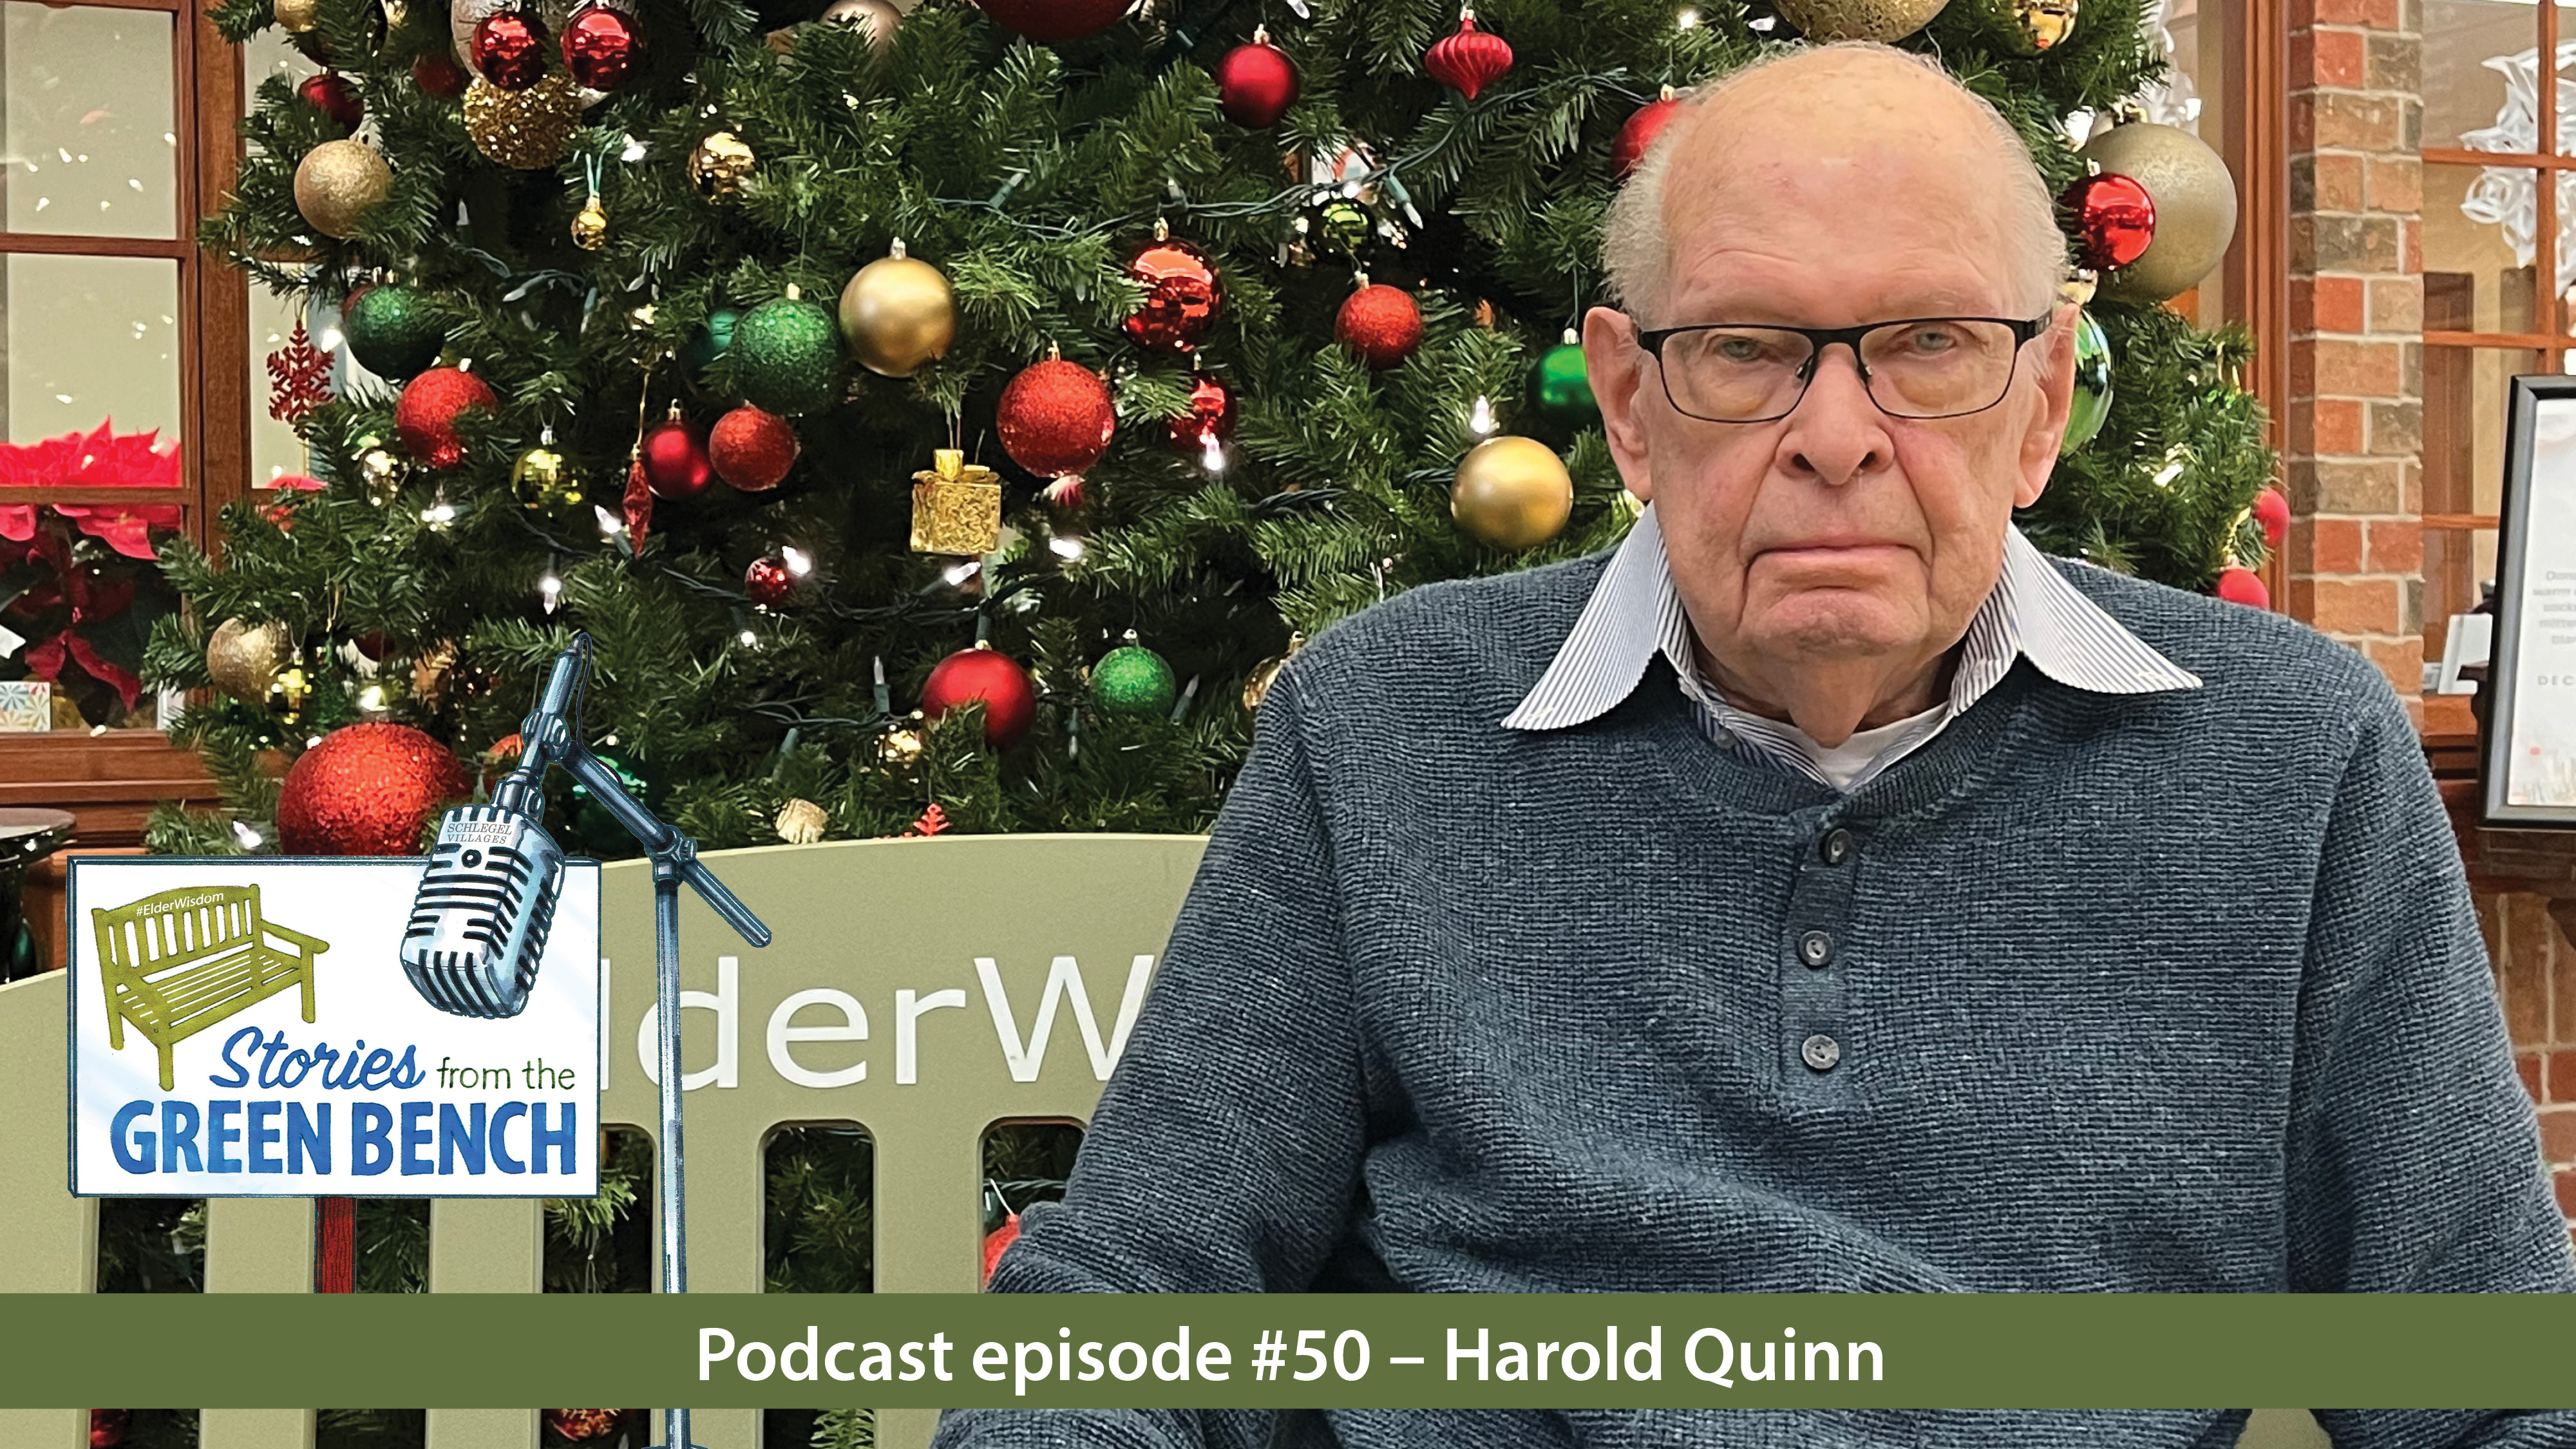 Harold Quinn sitting on the green bench in promotion of episode #50 of the podcast